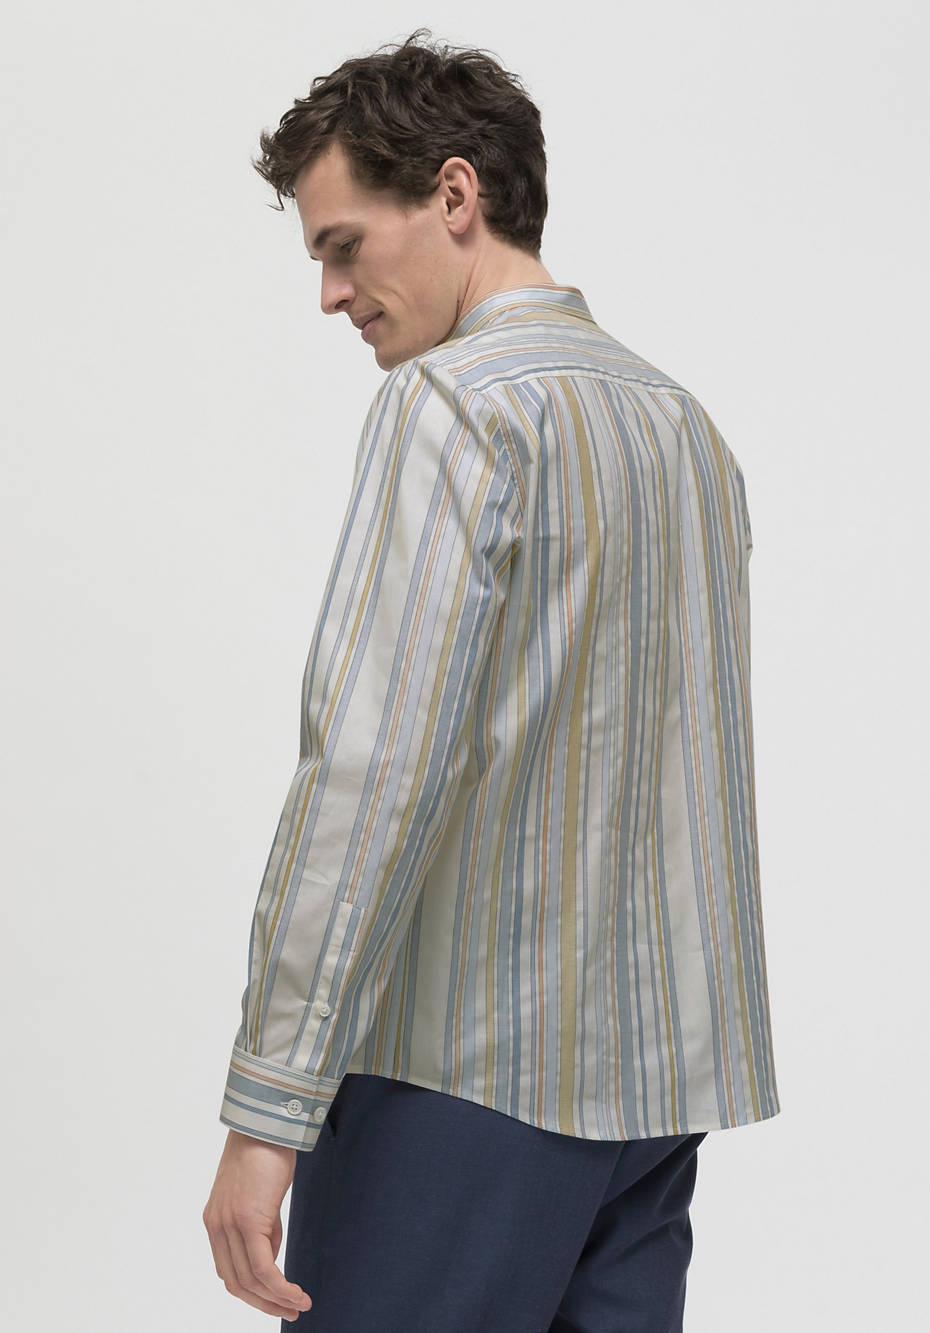 Comfort Fit striped shirt made of pure organic cotton